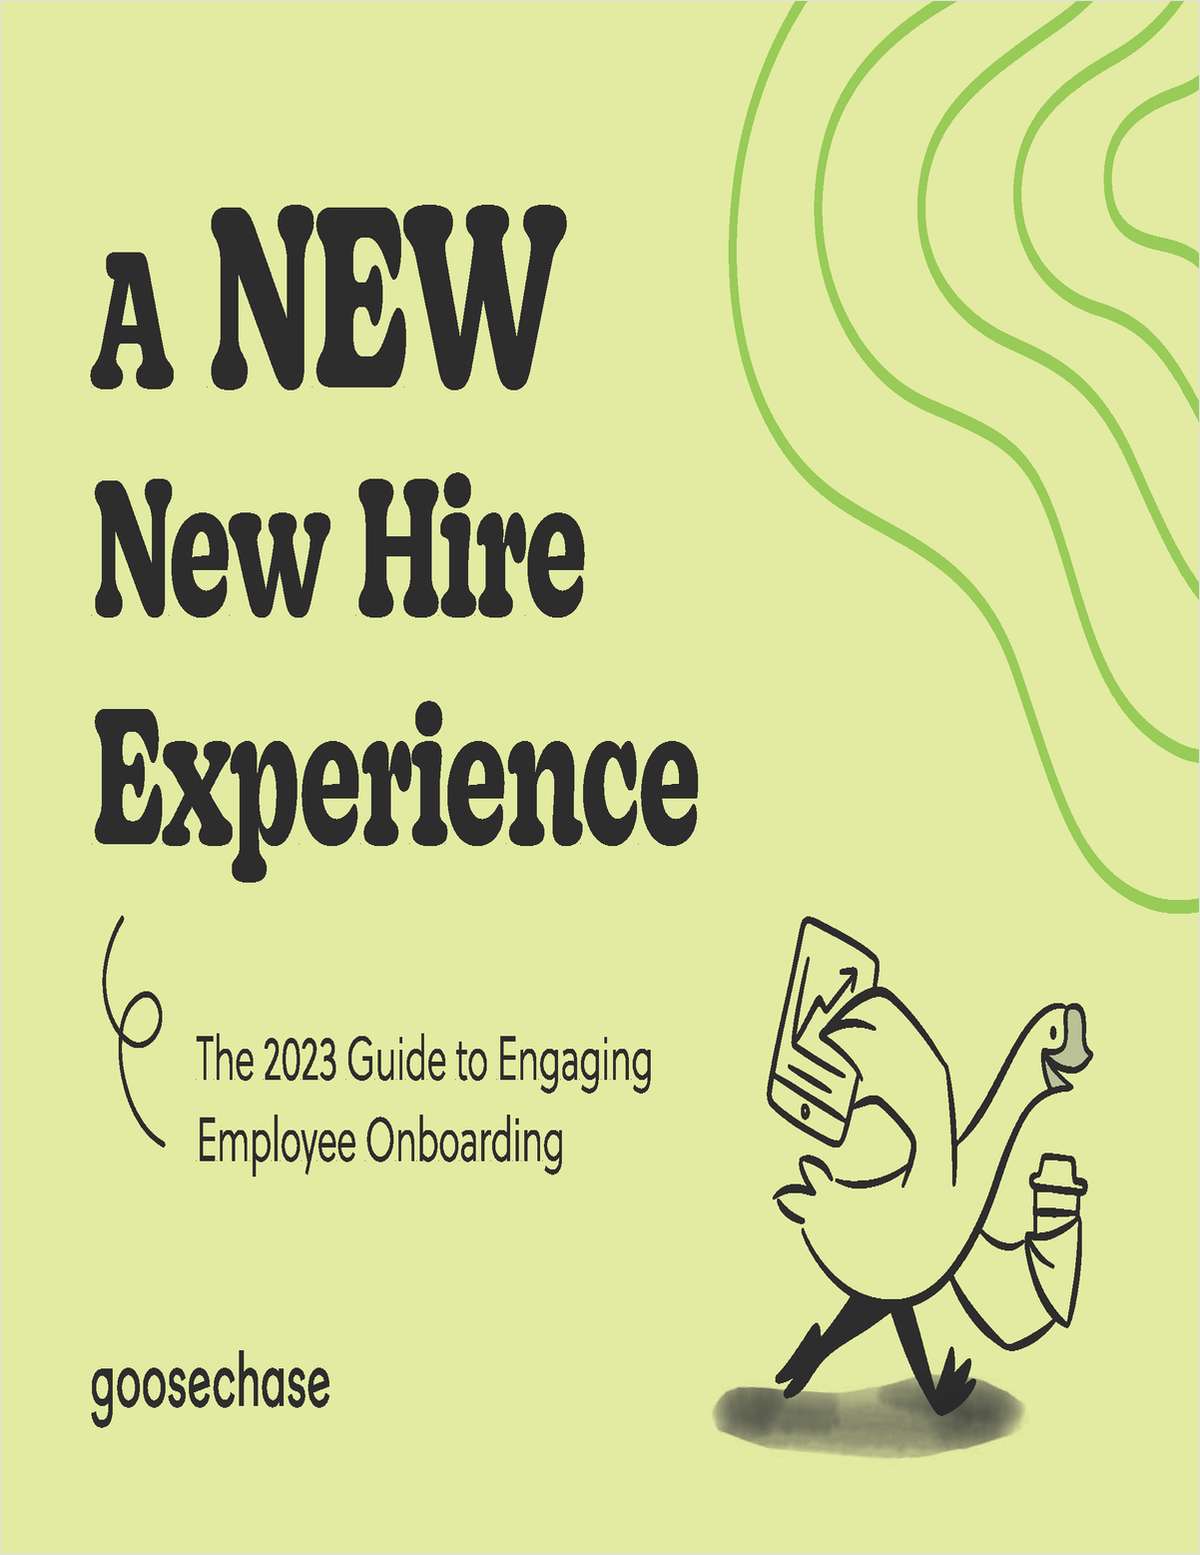 The 2023 Guide to Engaging Employee Onboarding